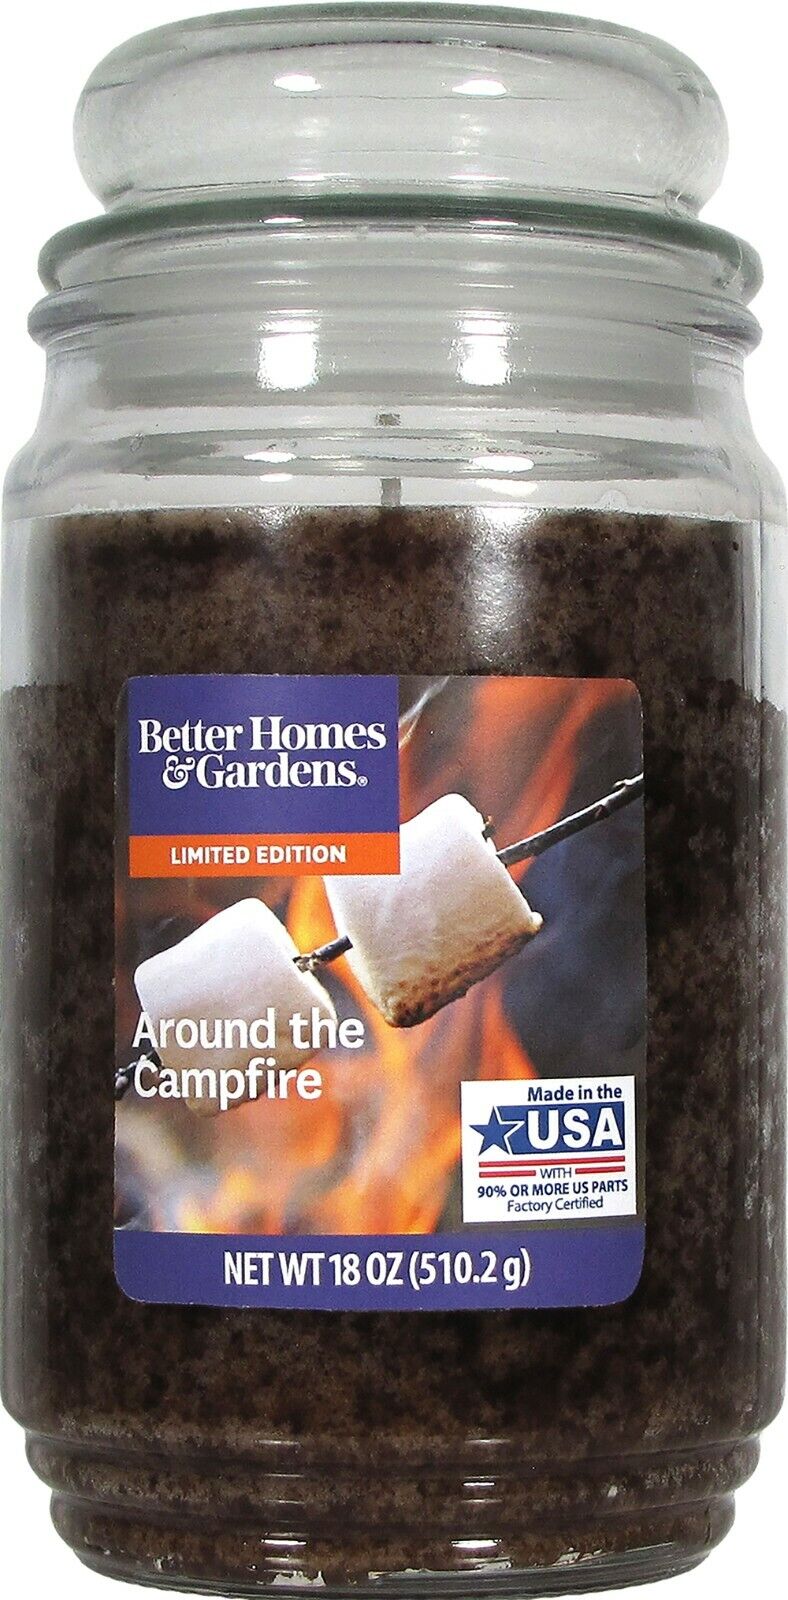 2 x Better Homes and Gardens Jar Candle Scented Fragrance Candles Glass Jar 18Oz